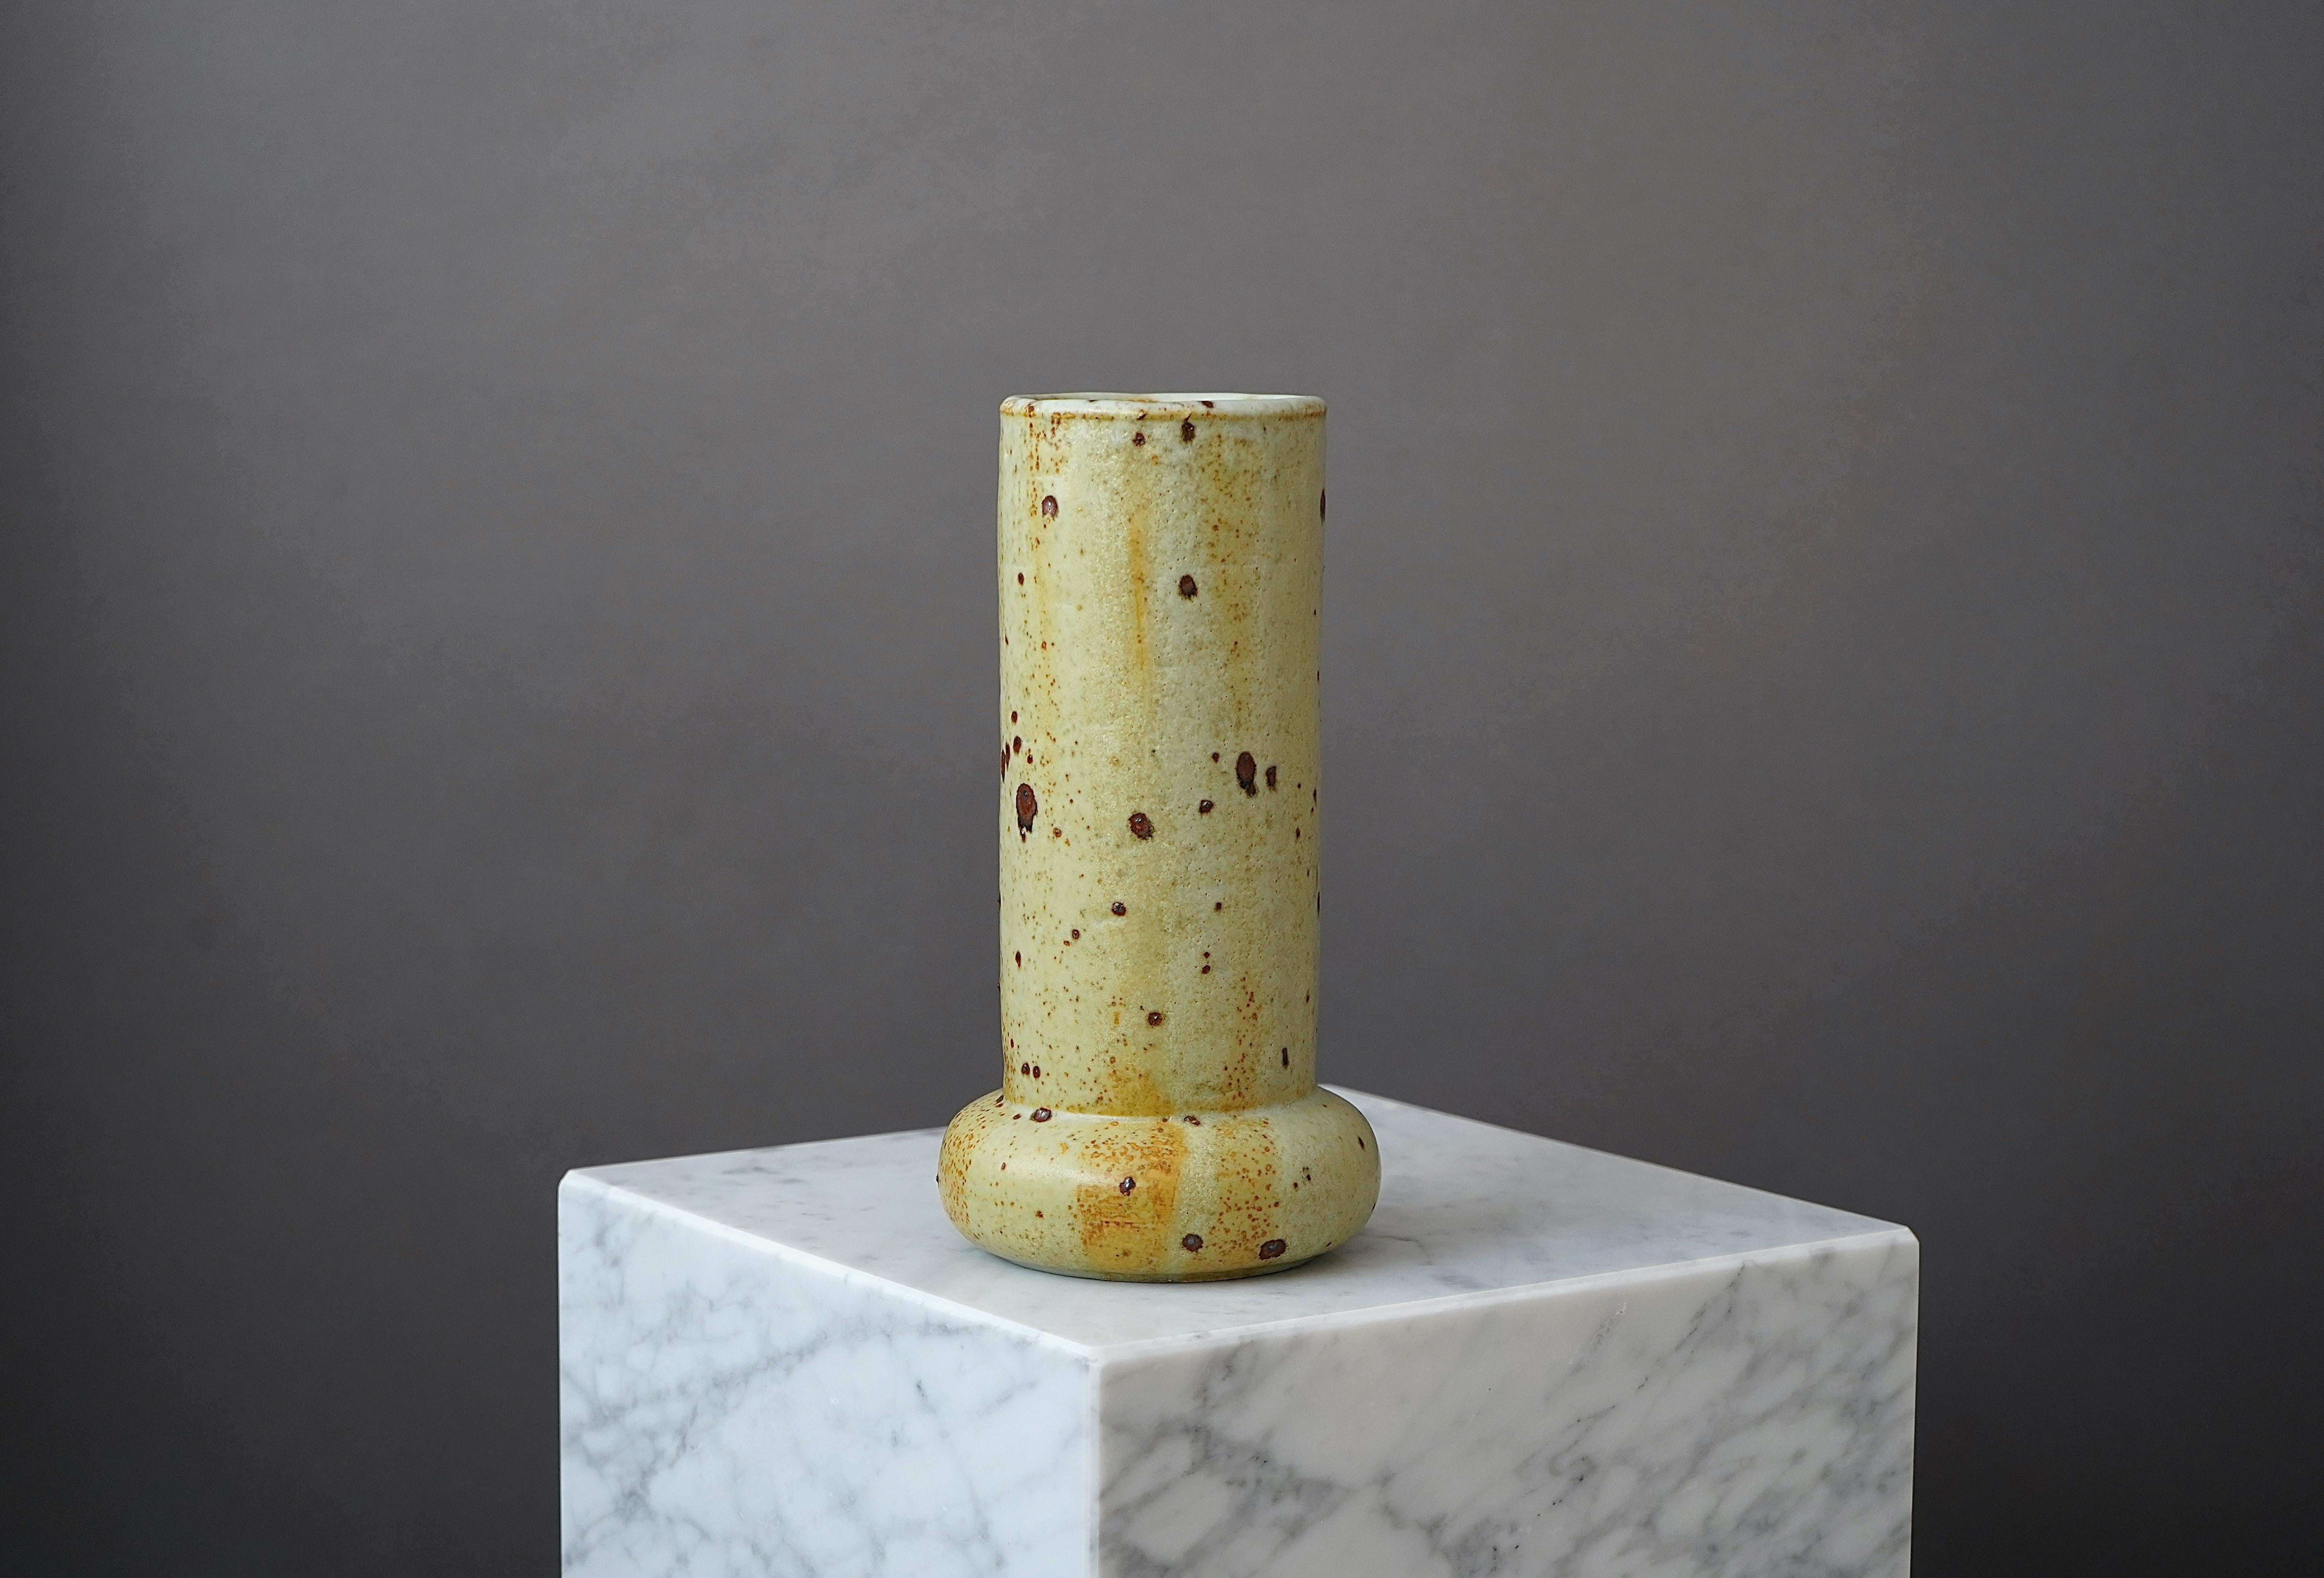 Turned Stoneware Vase by Marianne Westman for Rorstrand, Sweden, 1960s For Sale